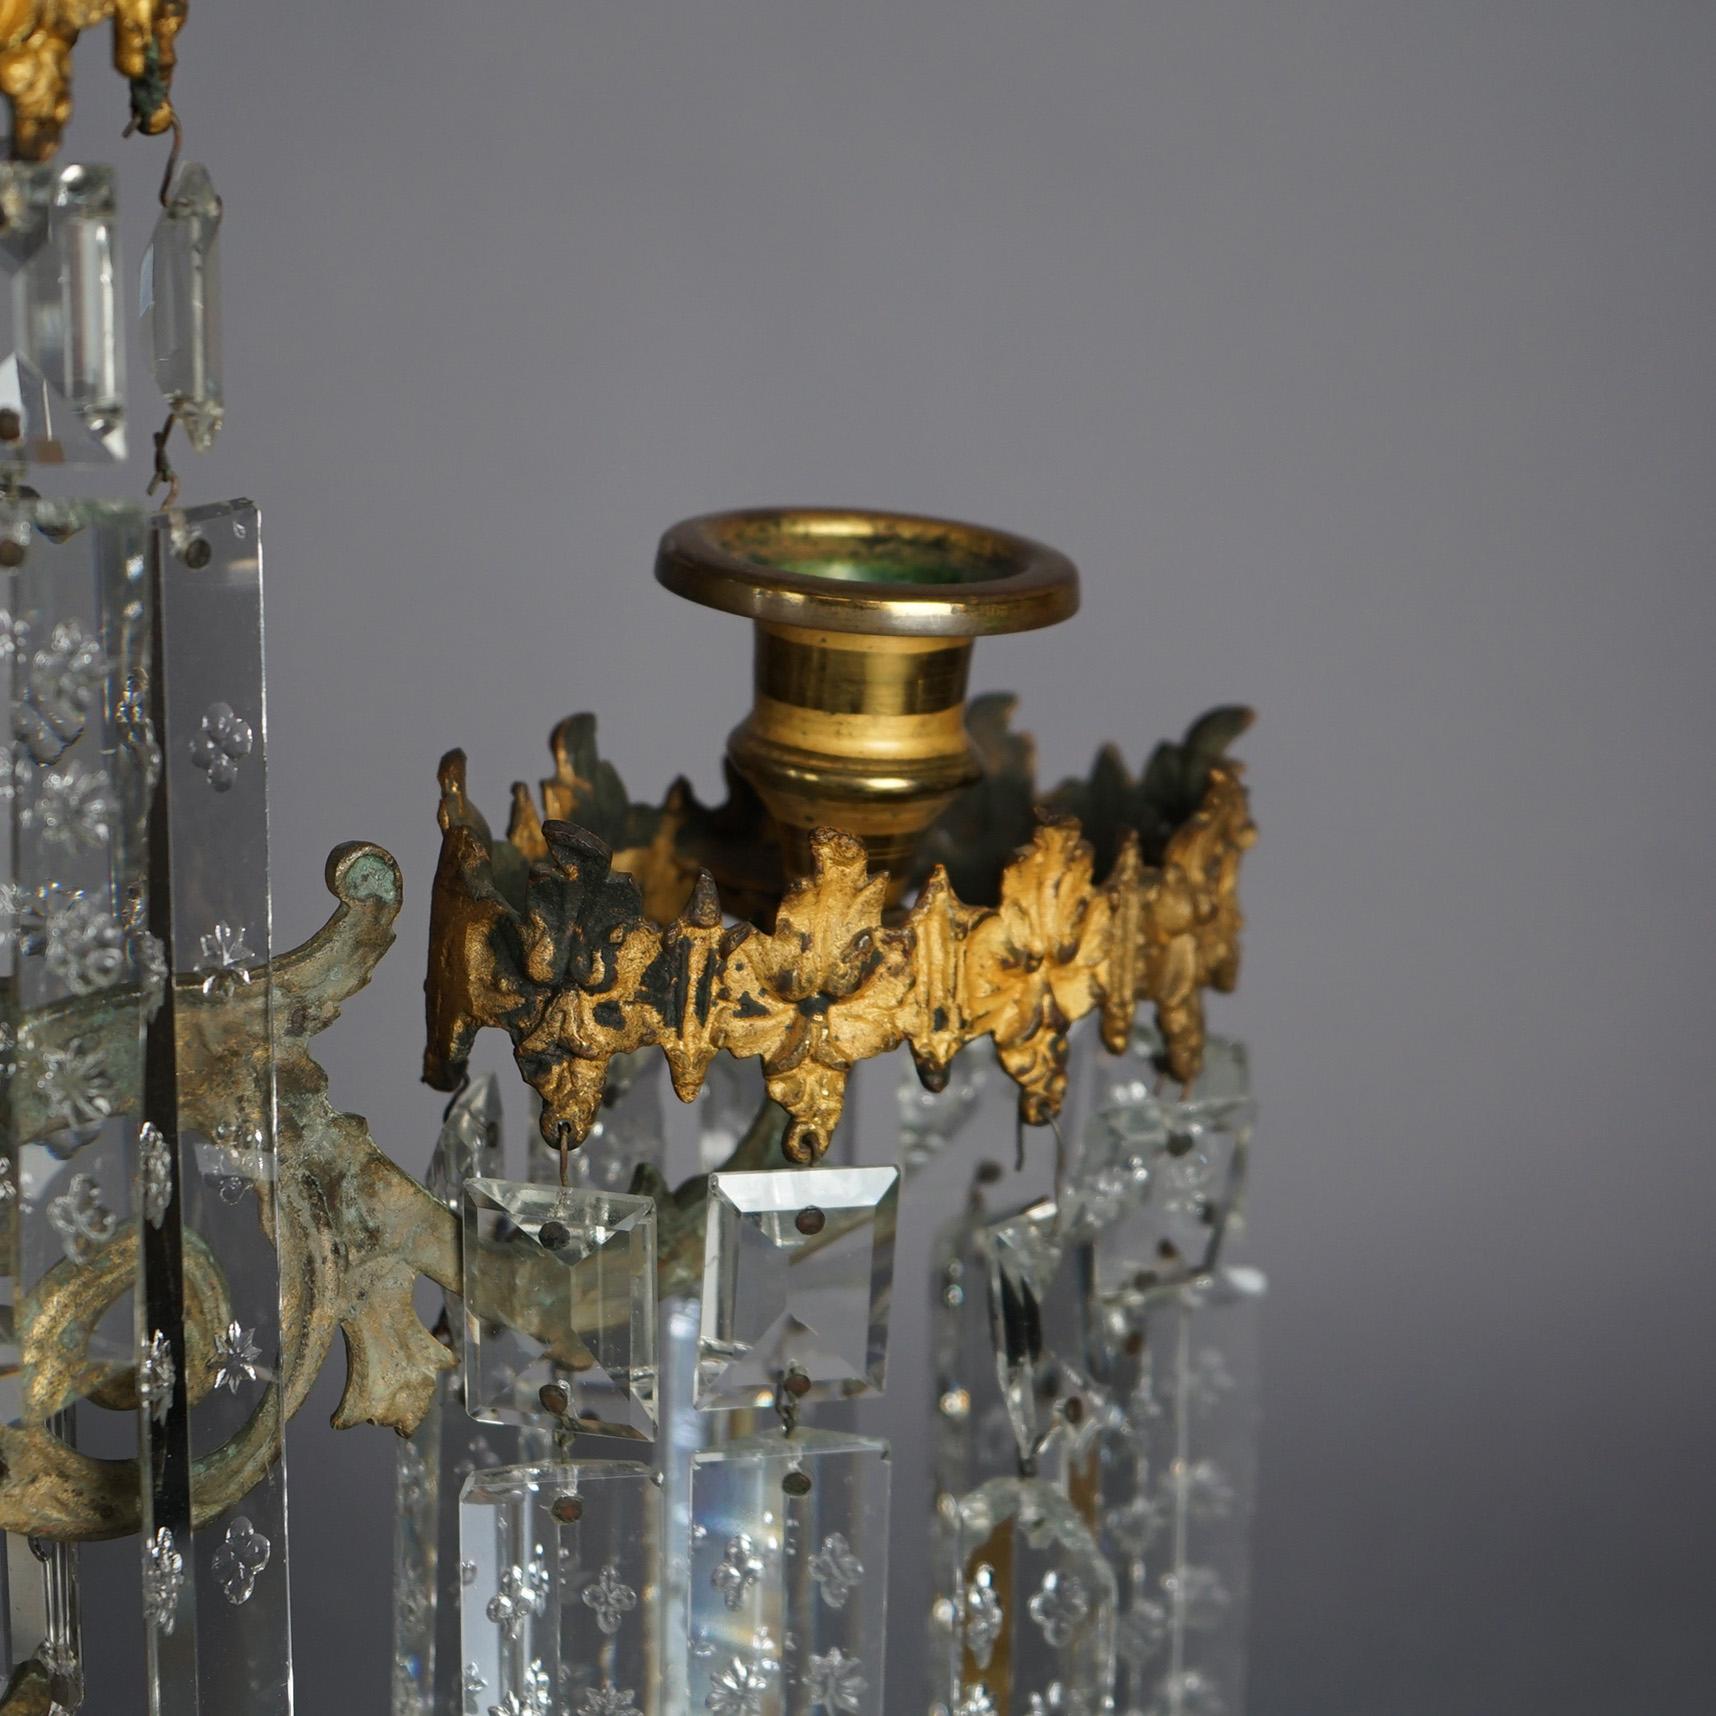 Antique Gilt Bronze American Girandole Candelabras with Marble & Crystals C1880 For Sale 14